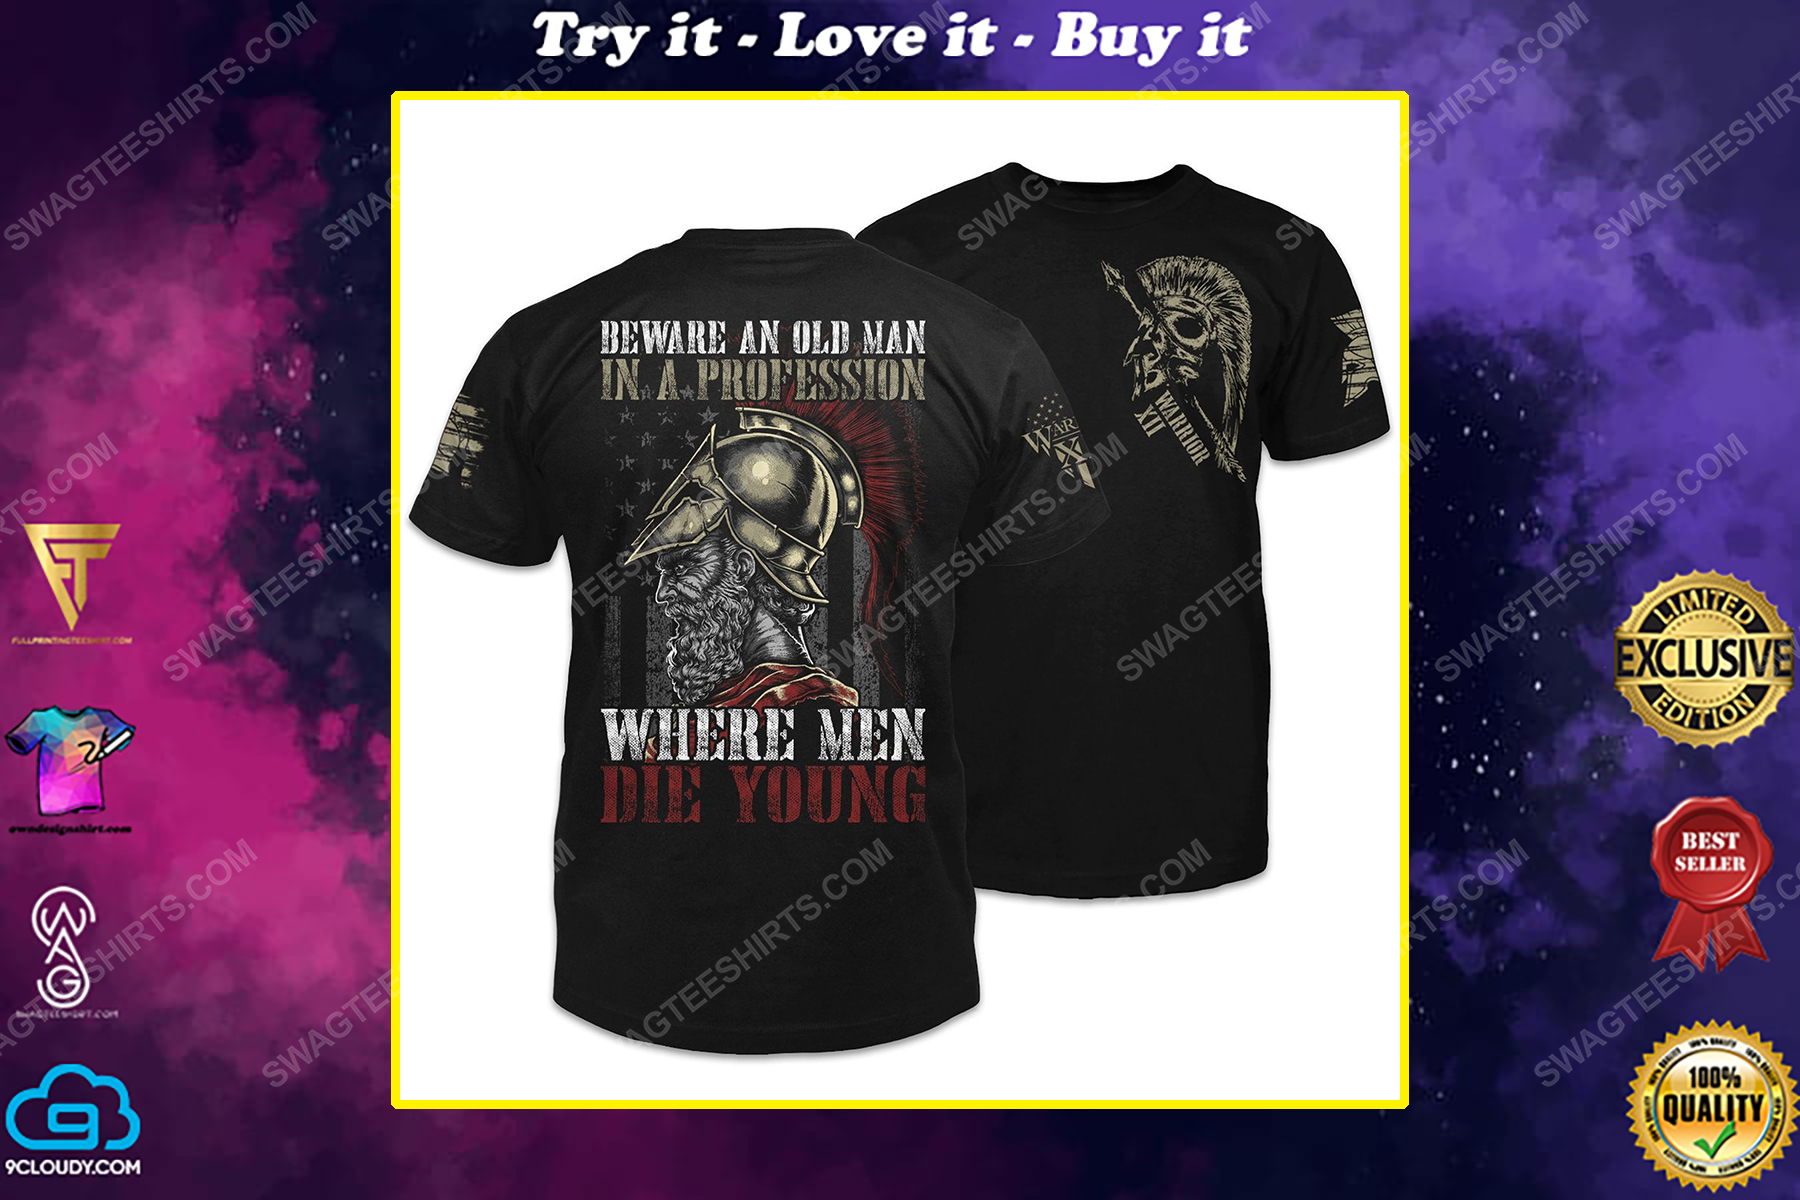 Beware an old man in a profession where men die young shirt